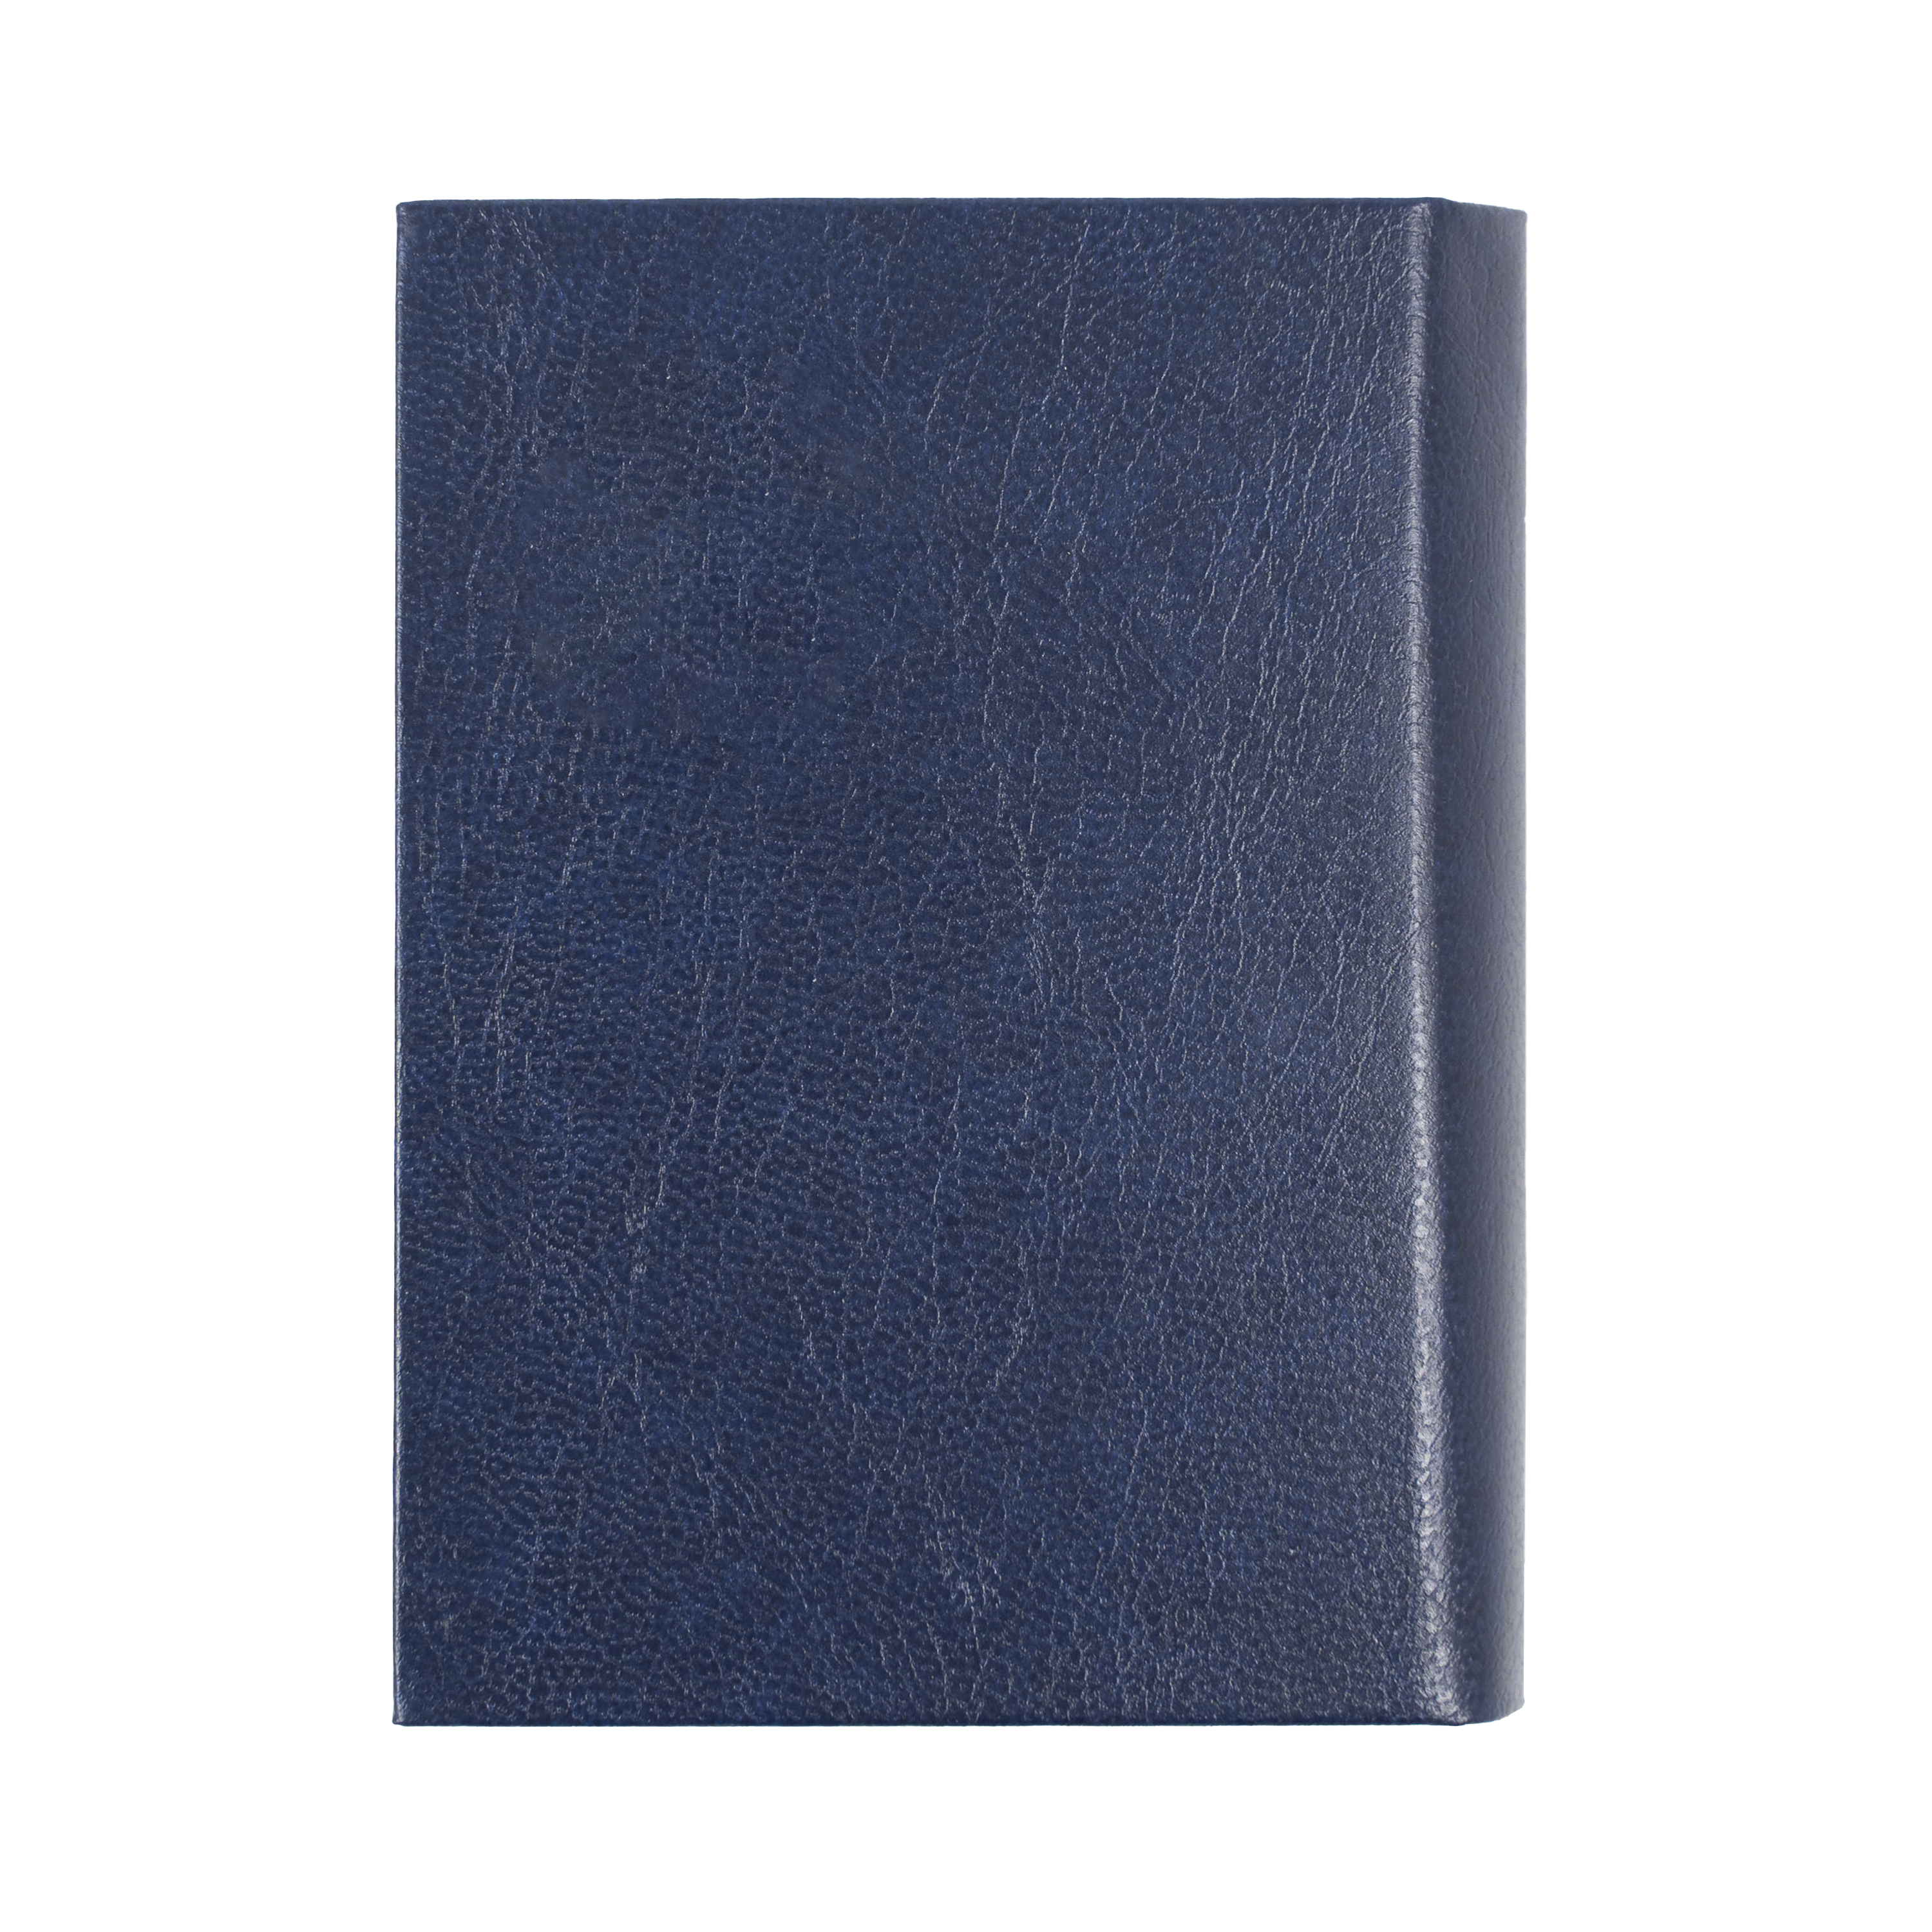 Sterling 2024 Diary - Day to Page with Pencil, Size A7 Blue / A7 (105 x 74mm)